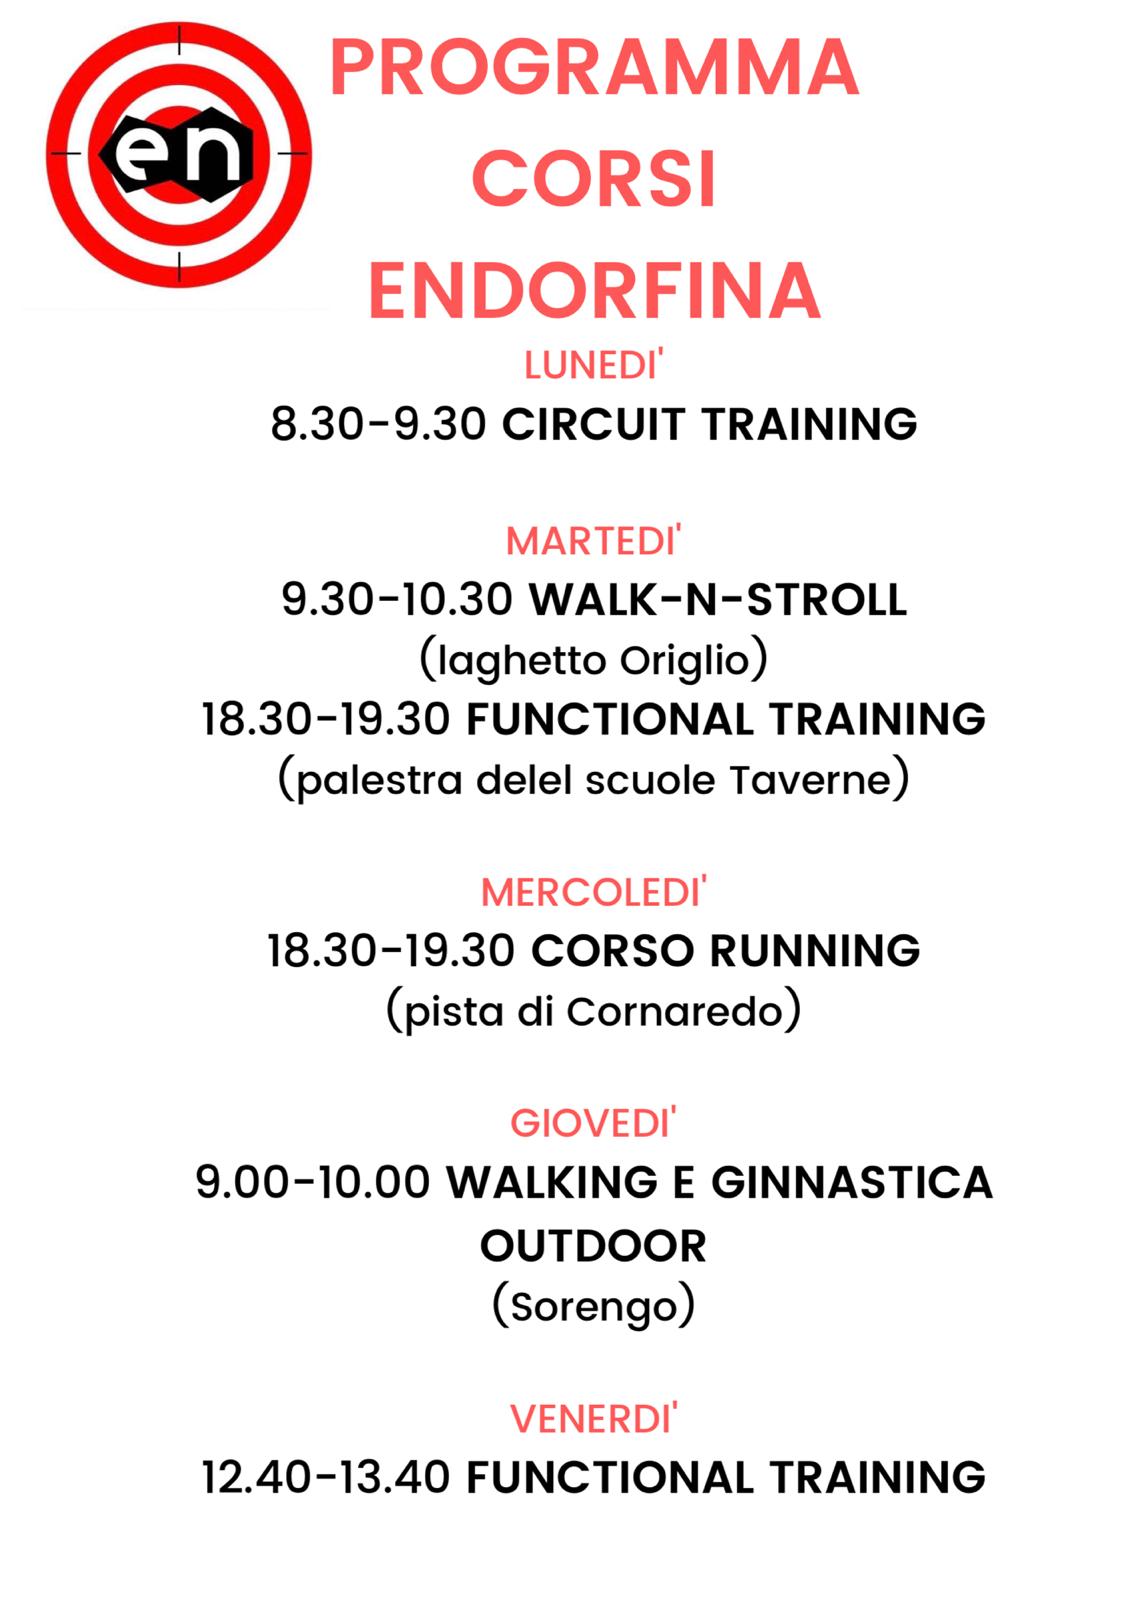 You are currently viewing PROGRAMMA CORSI ENDORFINA 2019/2020